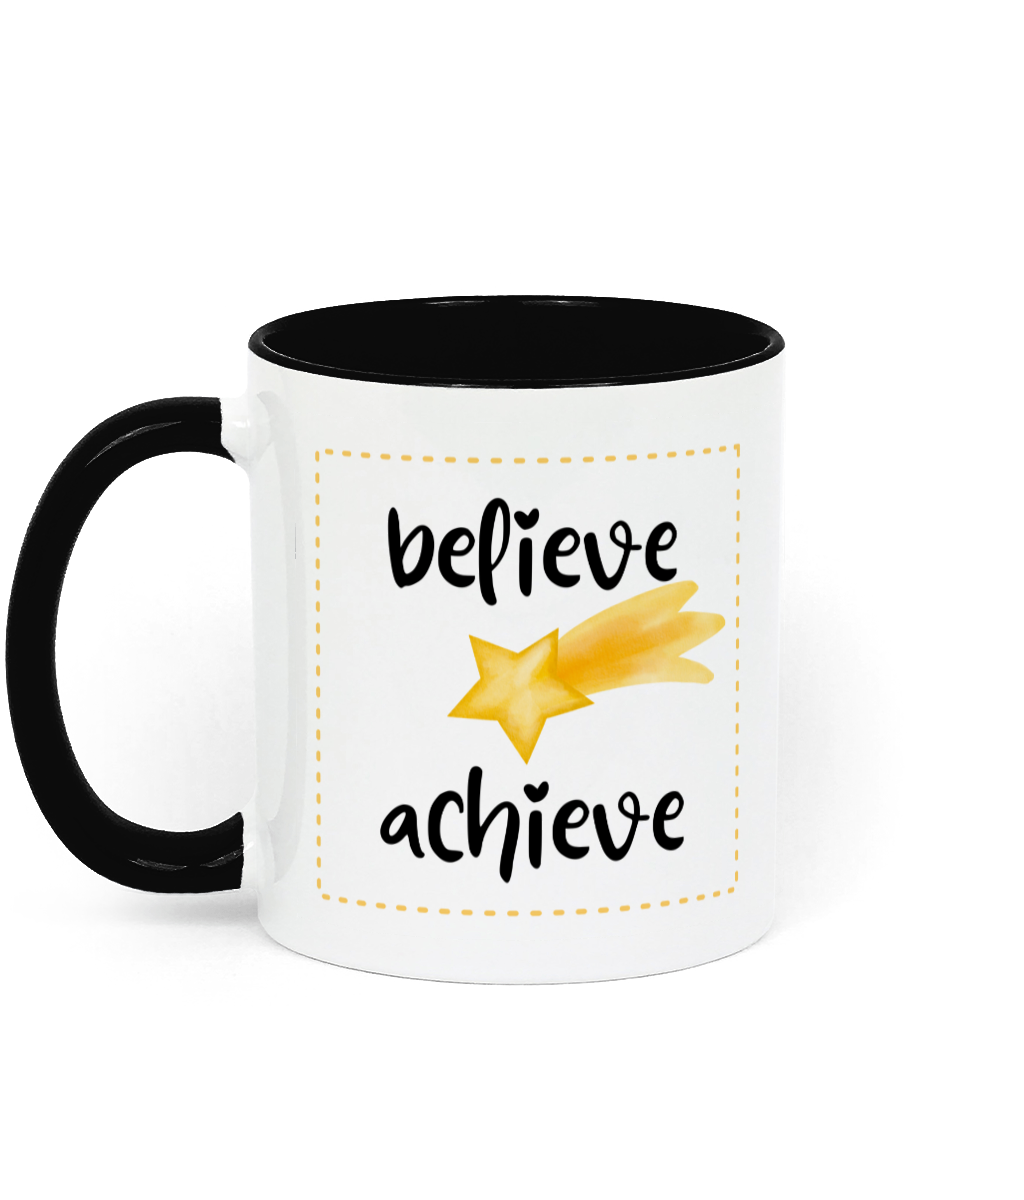 Believe, Achieve 11 oz two-tone mug. Daily Affirmations, Motivation, Inspiration. Perfect Gift.